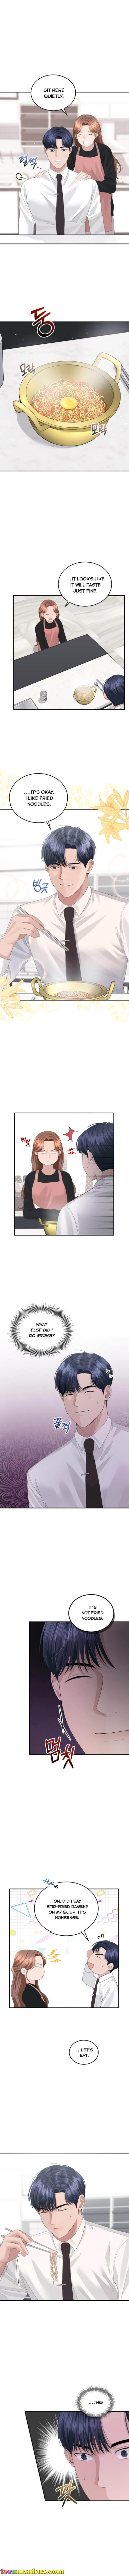 The Essence Of A Perfect Marriage Chapter 42 page 5 - Mangakakalot